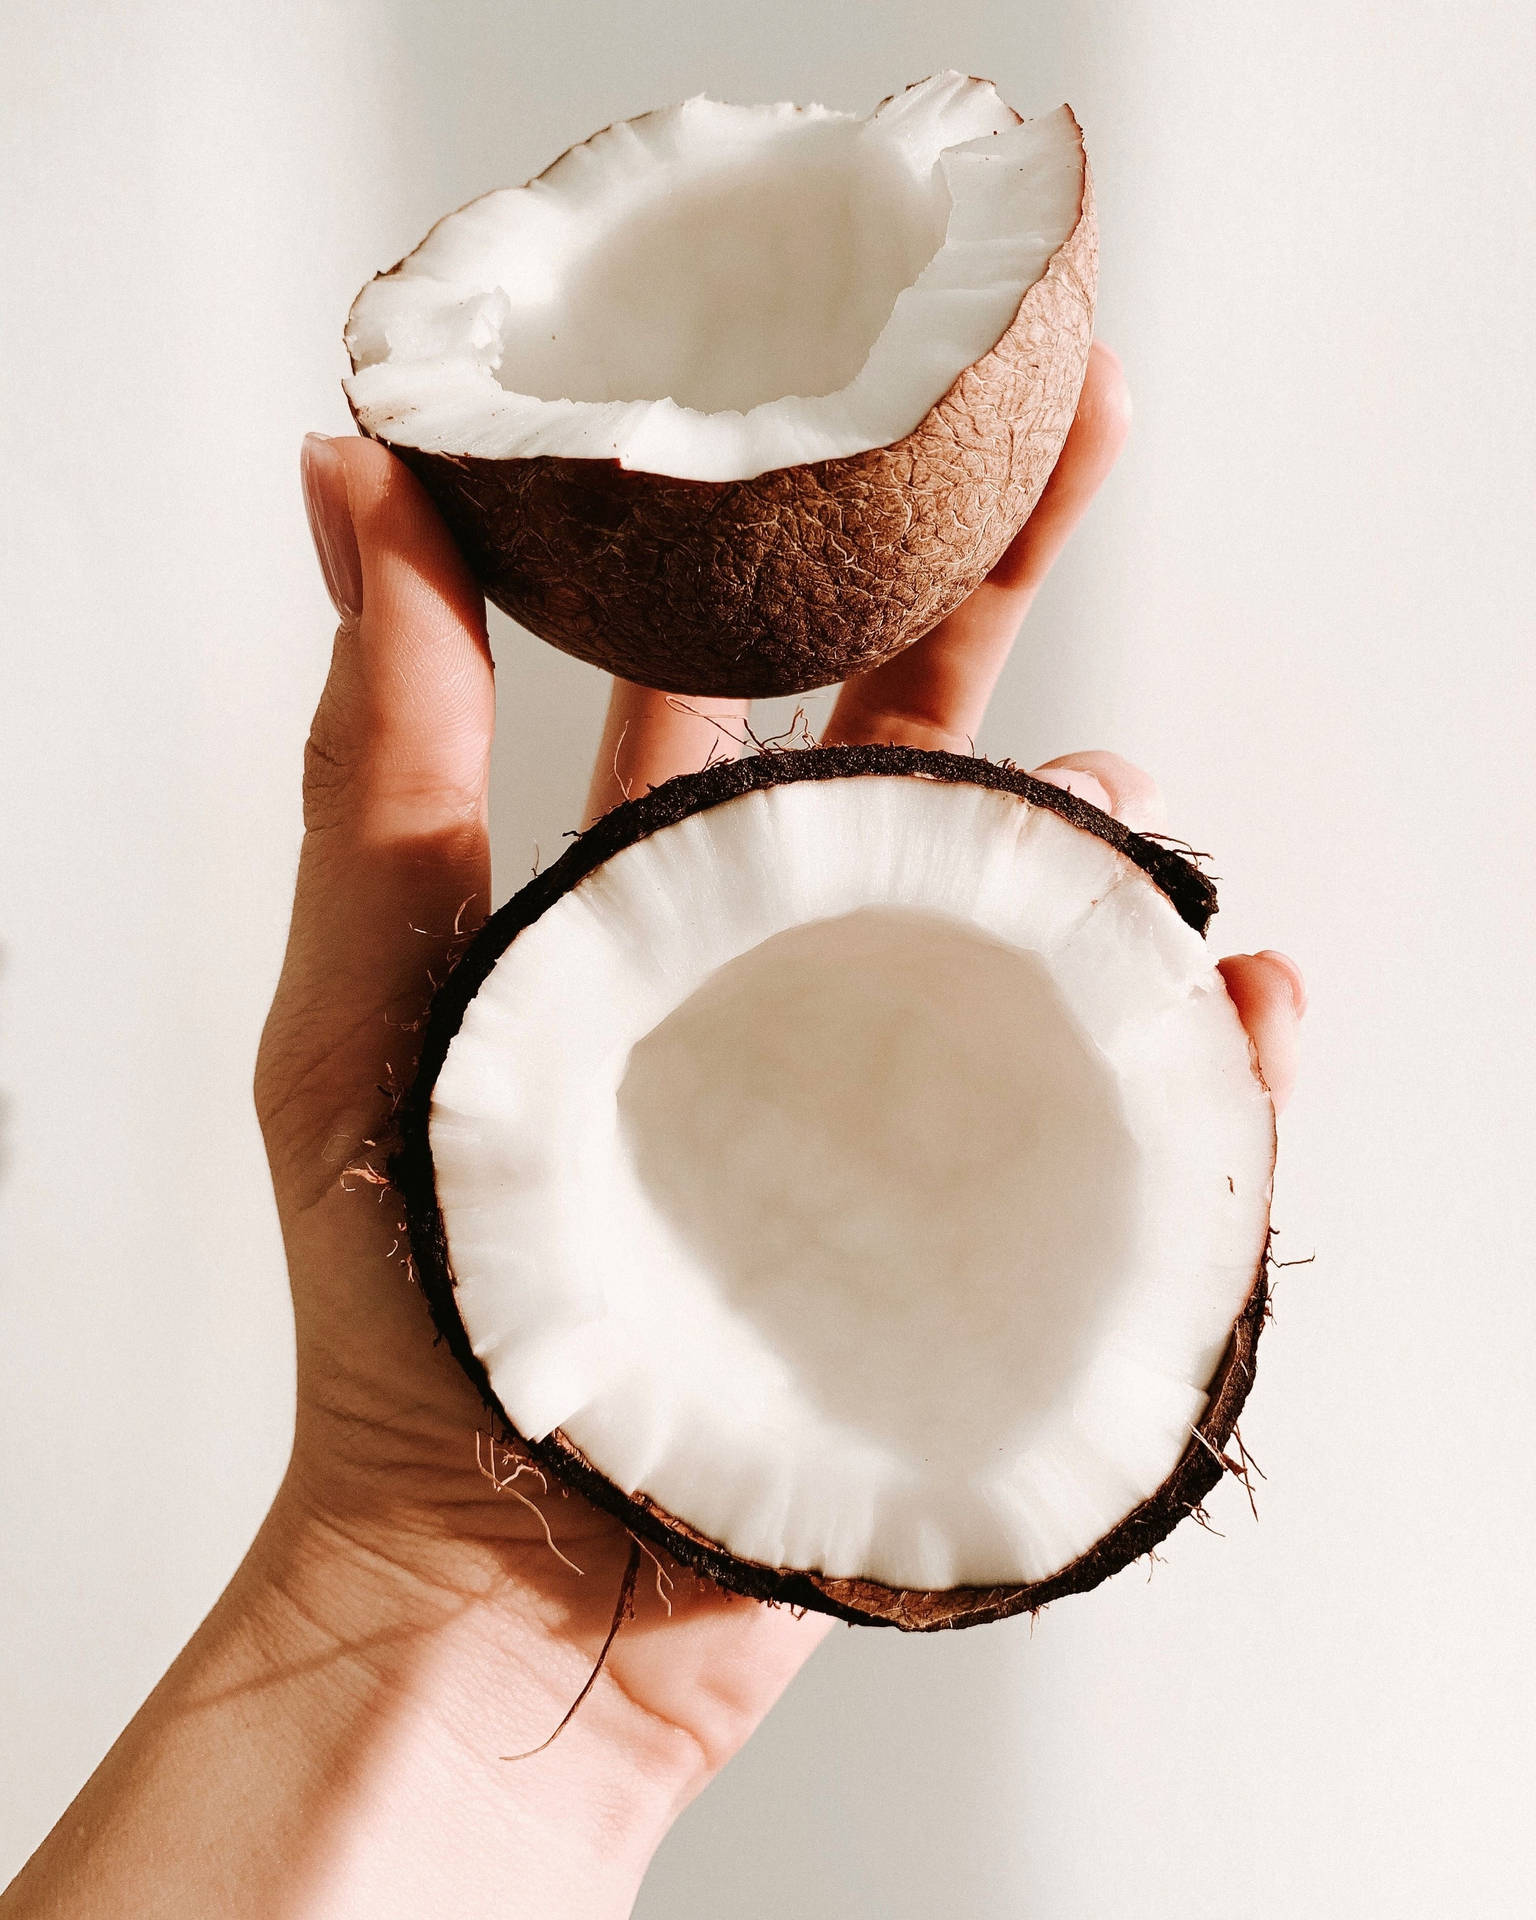 A hand holding a coconut cut in half - Coconut, food, foodie